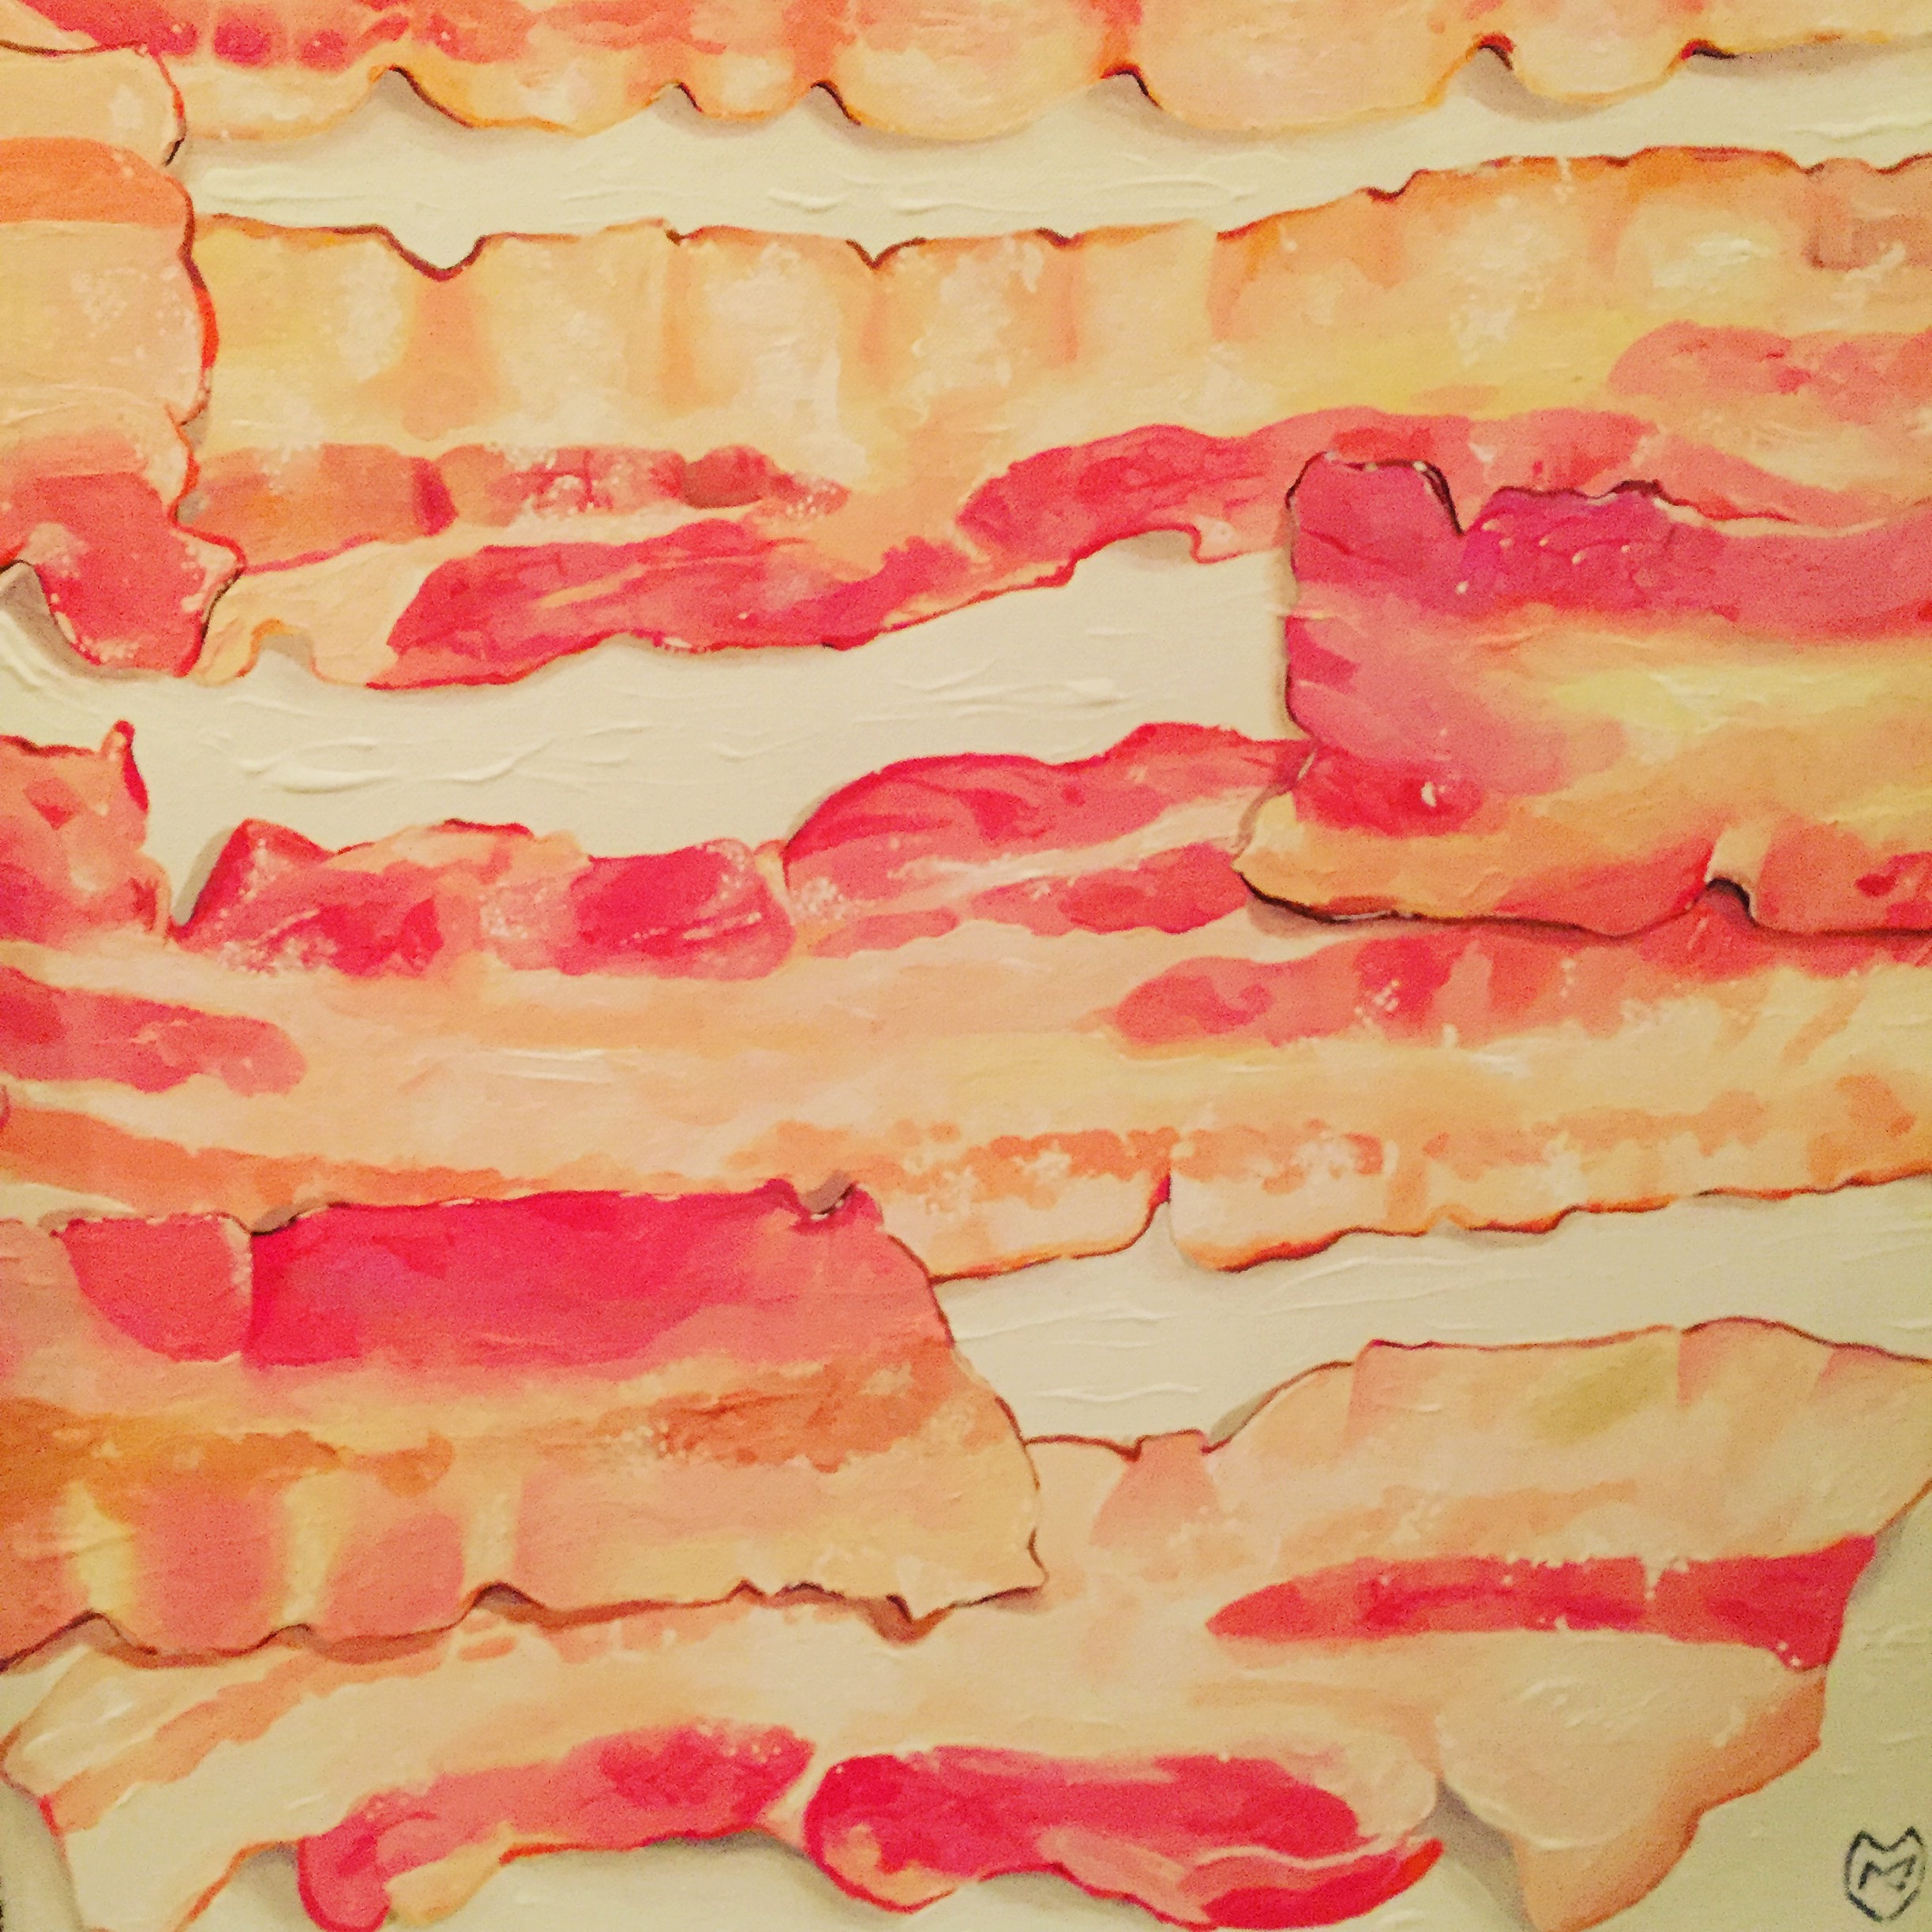 Bacon by maite sant credit Marion renard